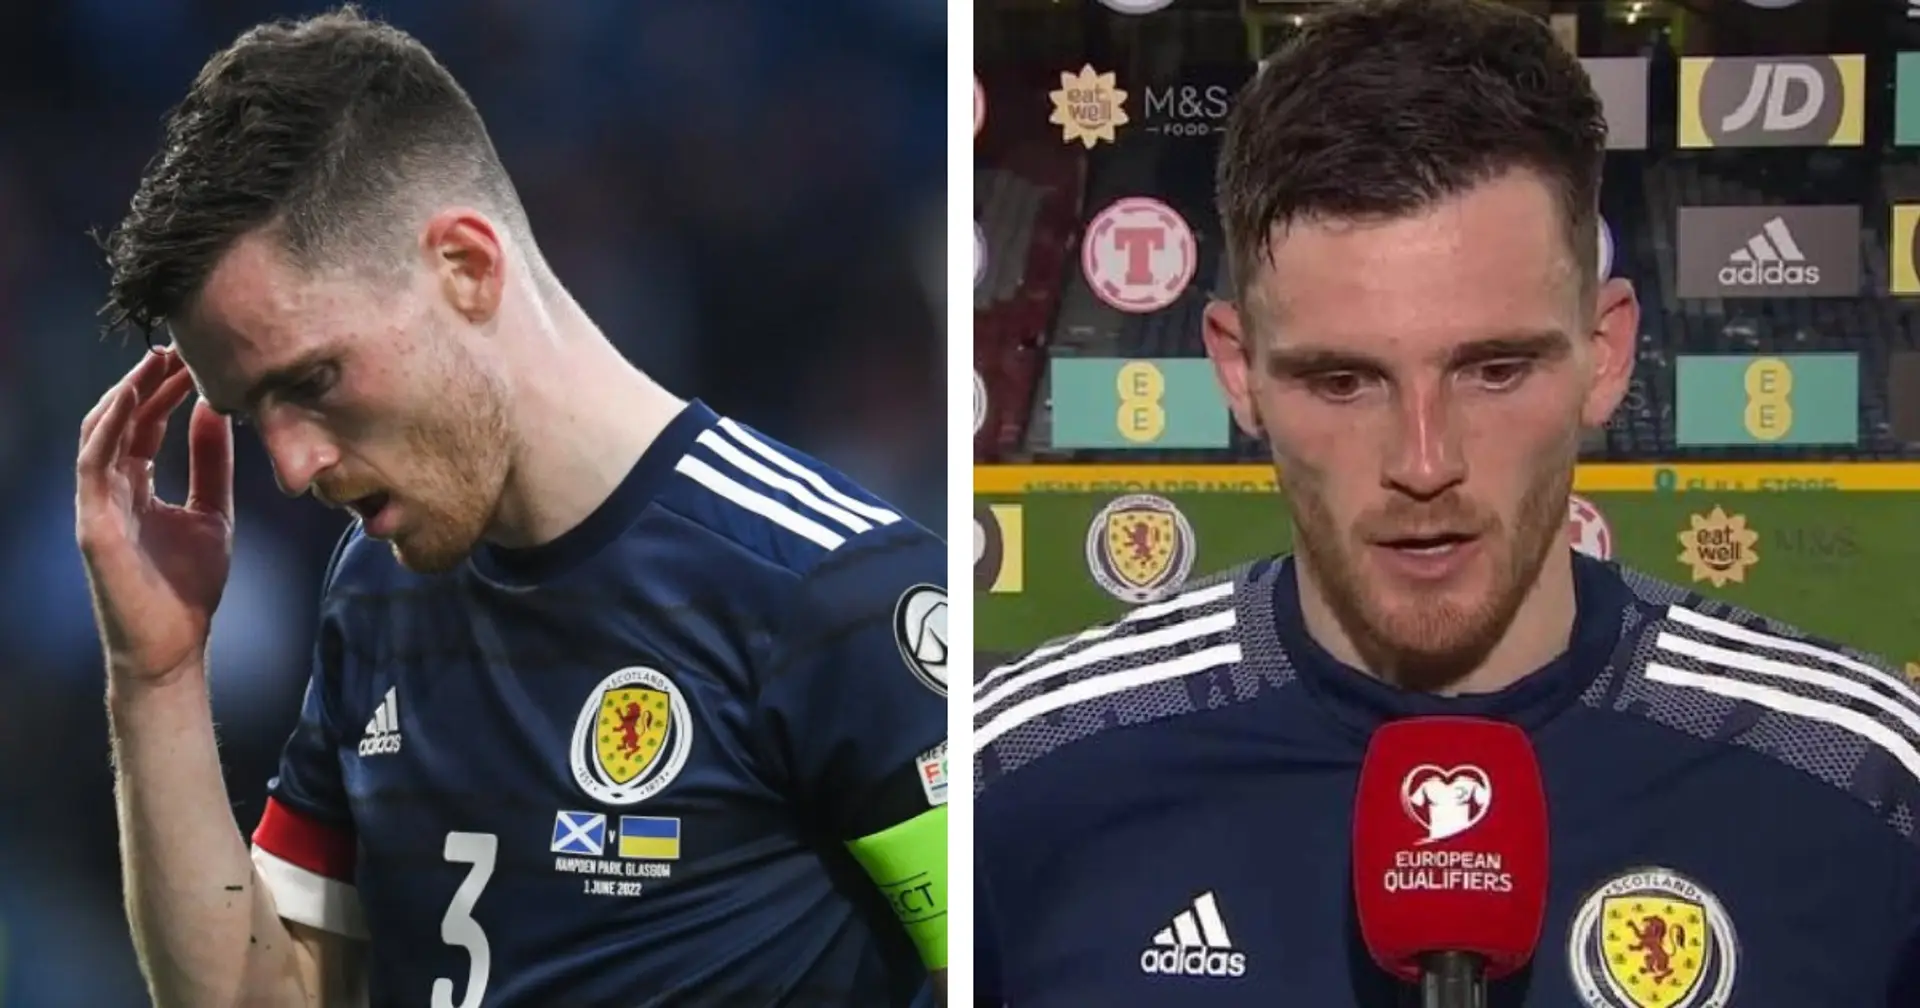 'It’s been the toughest 10 days of my football career': Robertson and Scotland to miss World Cup after Ukraine loss